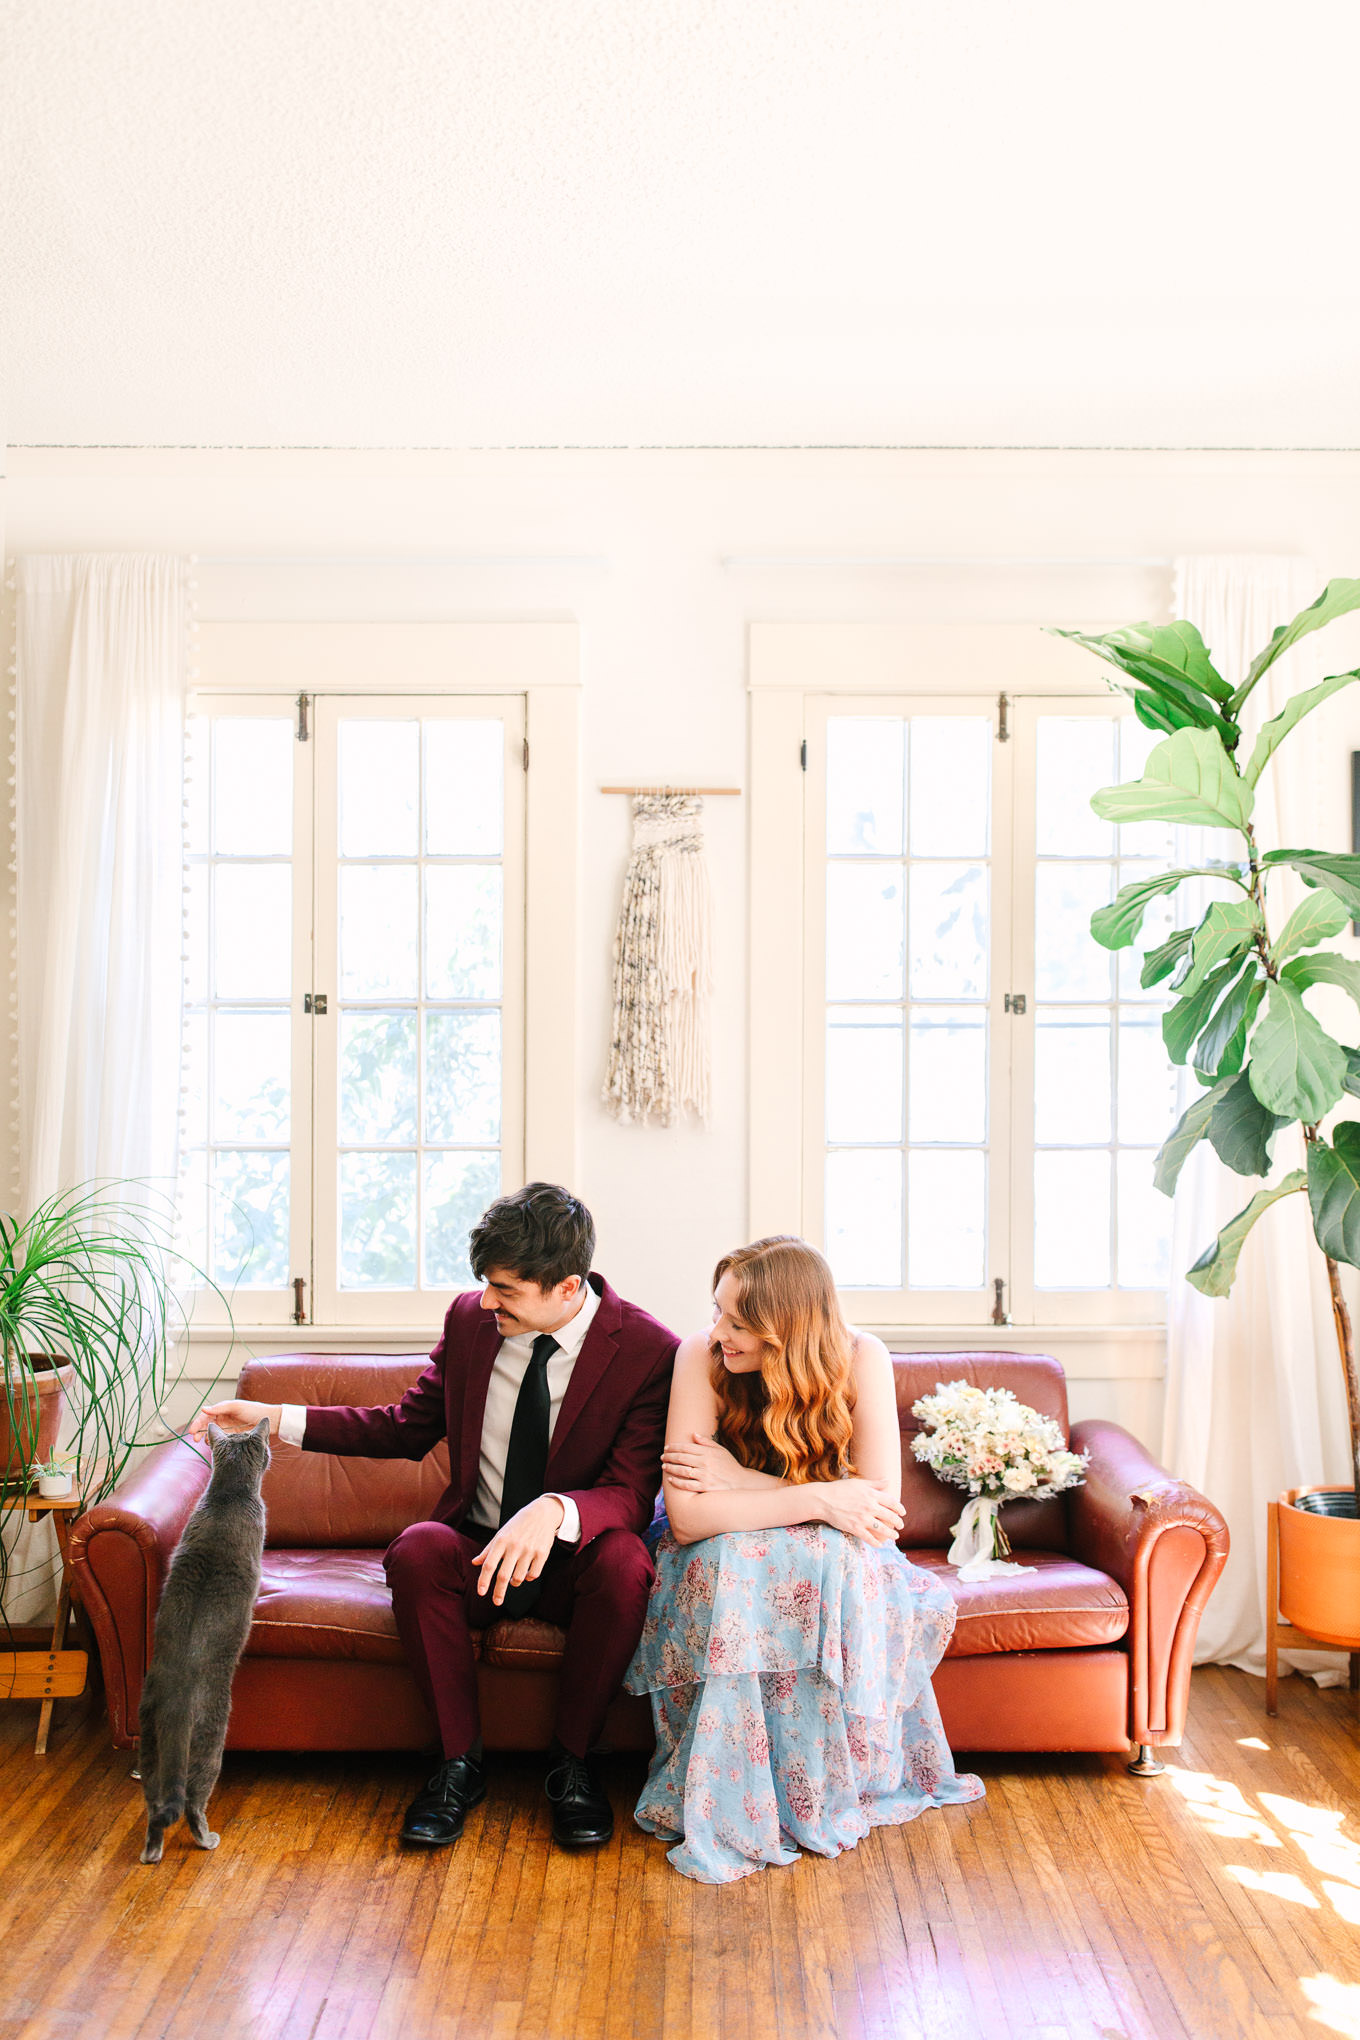 Couple playing with their cat at home | Los Angeles Arboretum Elopement | Colorful and elevated wedding photography for fun-loving couples in Southern California | #LosAngelesElopement #elopement #LAarboretum #LAskyline #elopementphotos   Source: Mary Costa Photography | Los Angeles